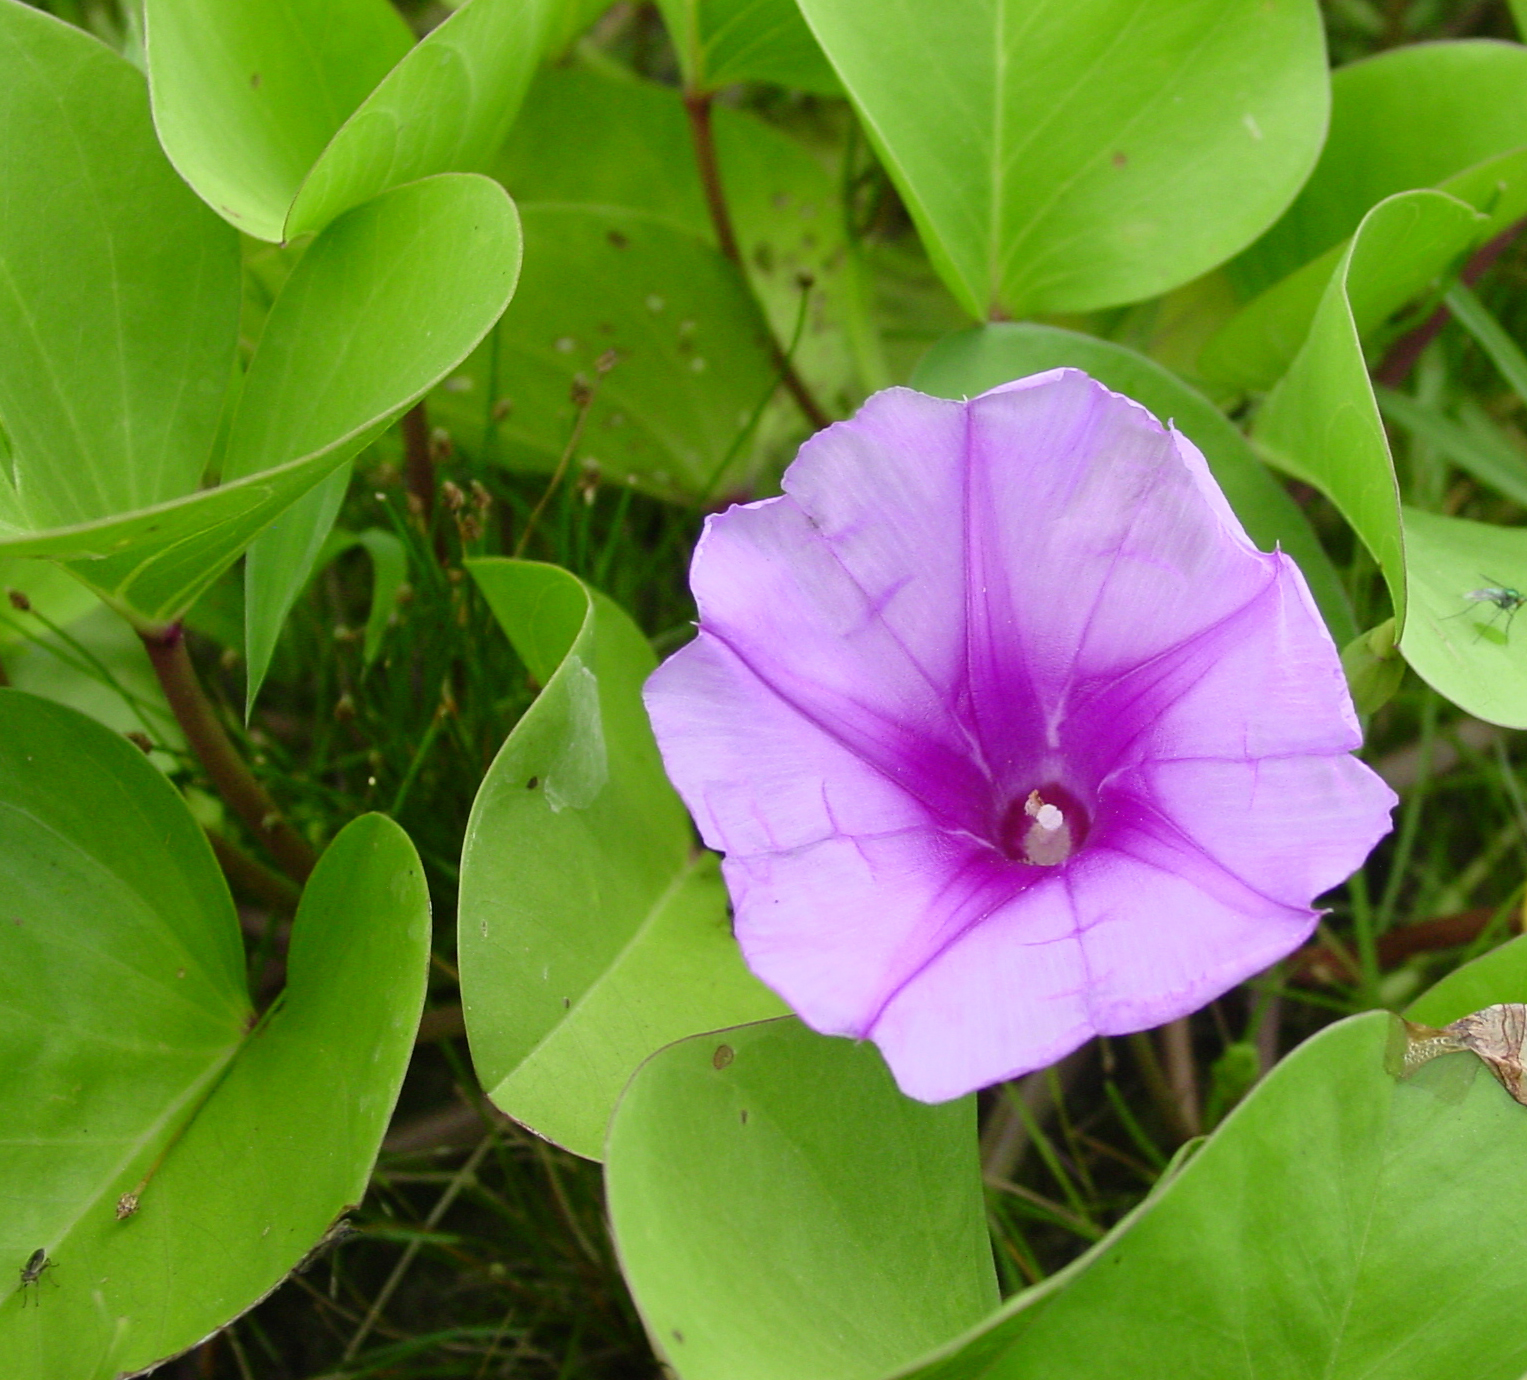 Ipomoea pes-capre-sonsol-plant 3 (Law)PS: Throughout the South Pacific and Southeast Asia, an extract of the beach morning glory, Ipomoea pres-caprae, is used on the skin to treat inflammation. In Thailand, a tincture of this plant is now sold in drugstores after first being proven safe and effective in rigorous clinical trials.